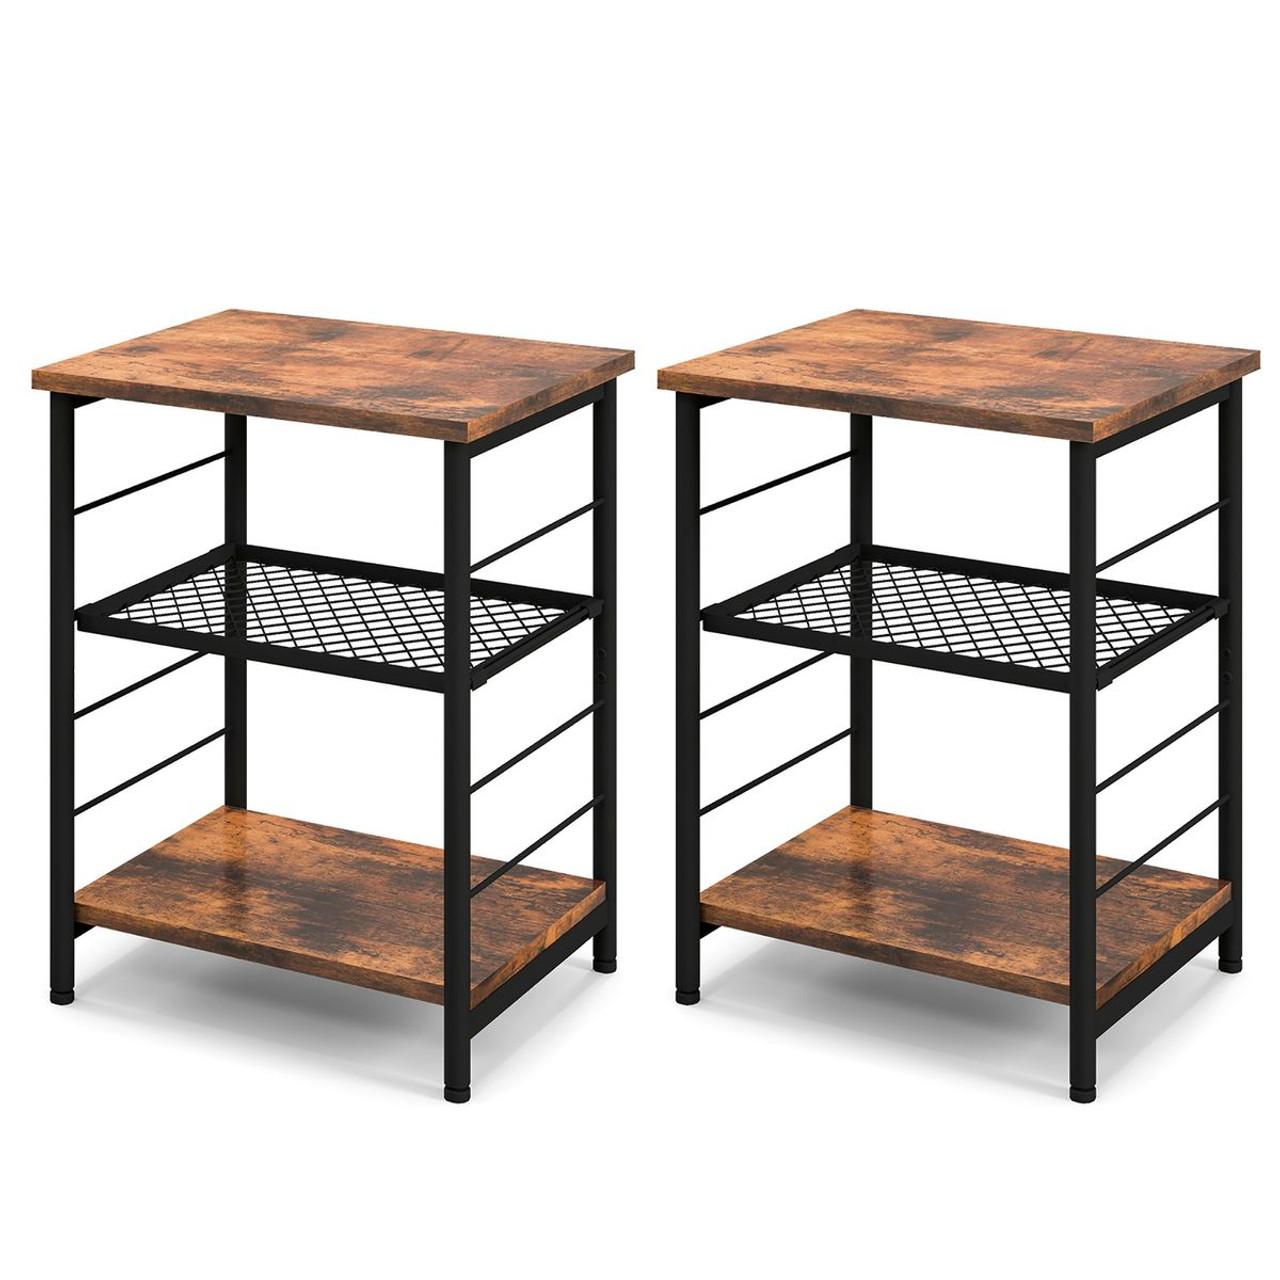 3-Tier Industrial Side Table with Adjustable Mesh Shelf (Set of 2) product image